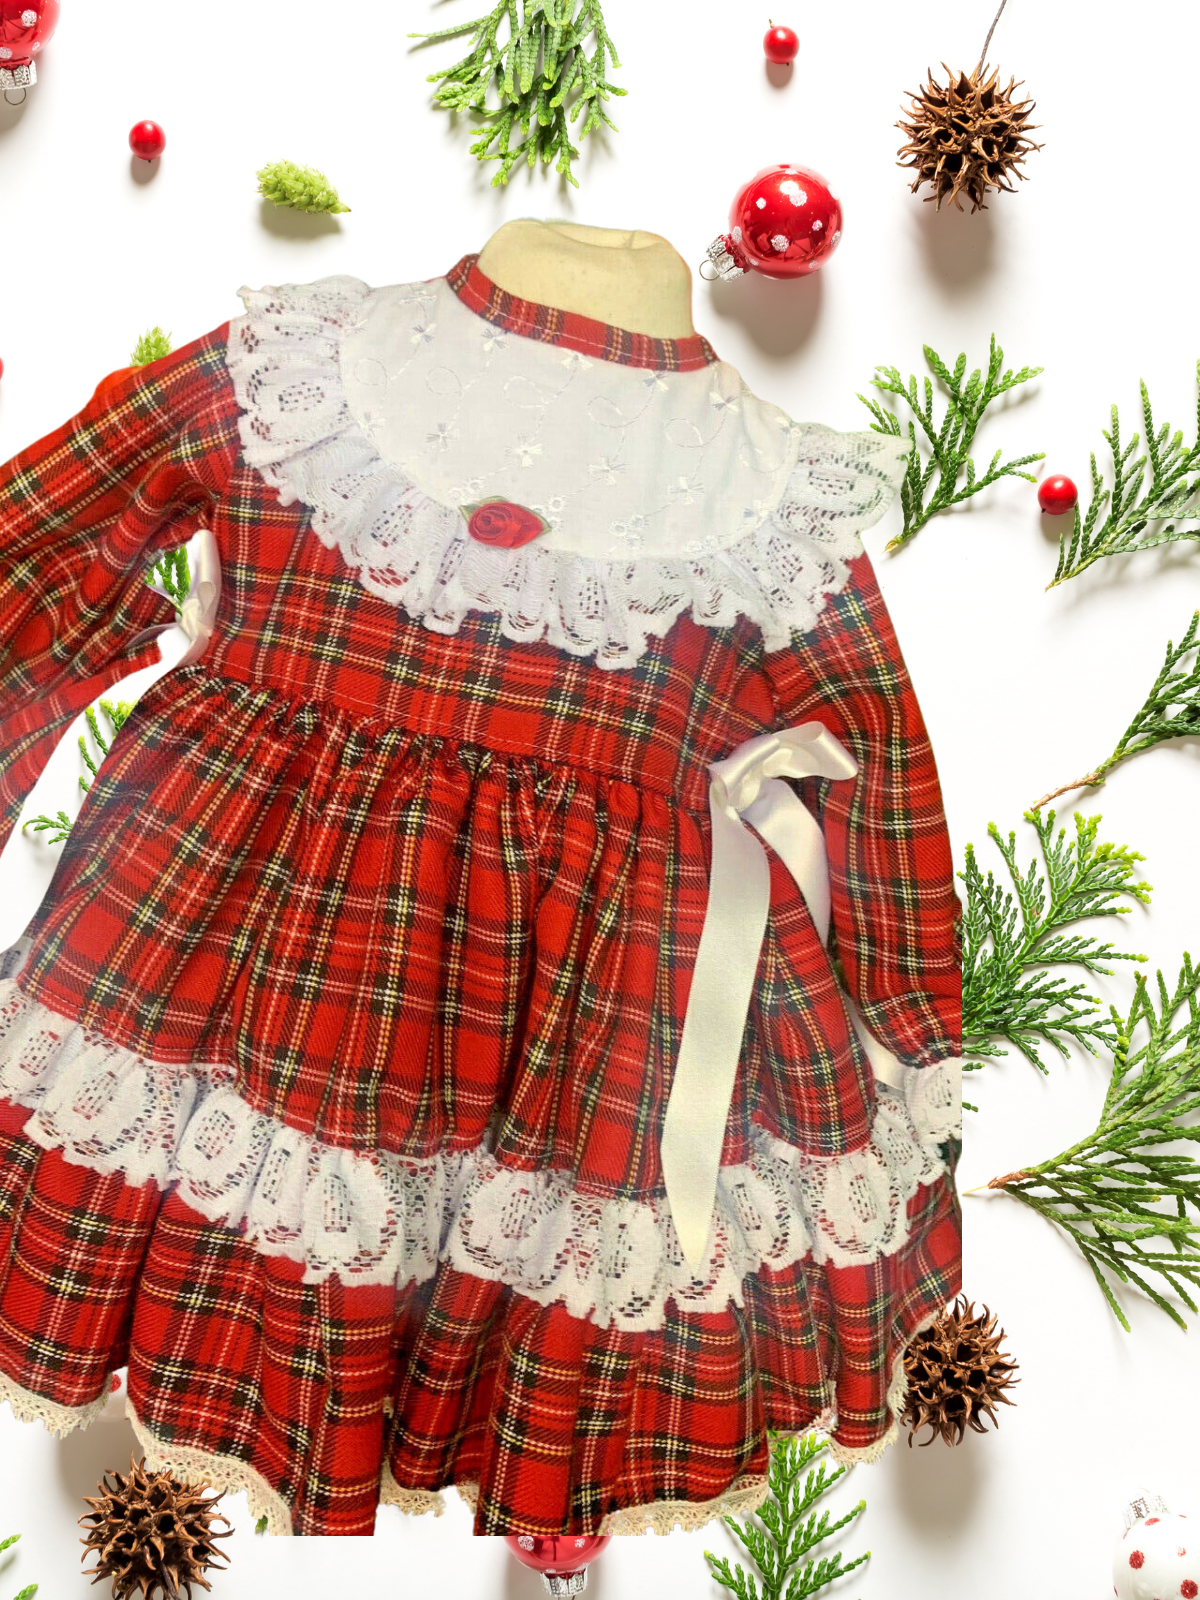 Yuletidings To You: HANDMADE in UK Spanish style Christmas dress (special sizing by request)